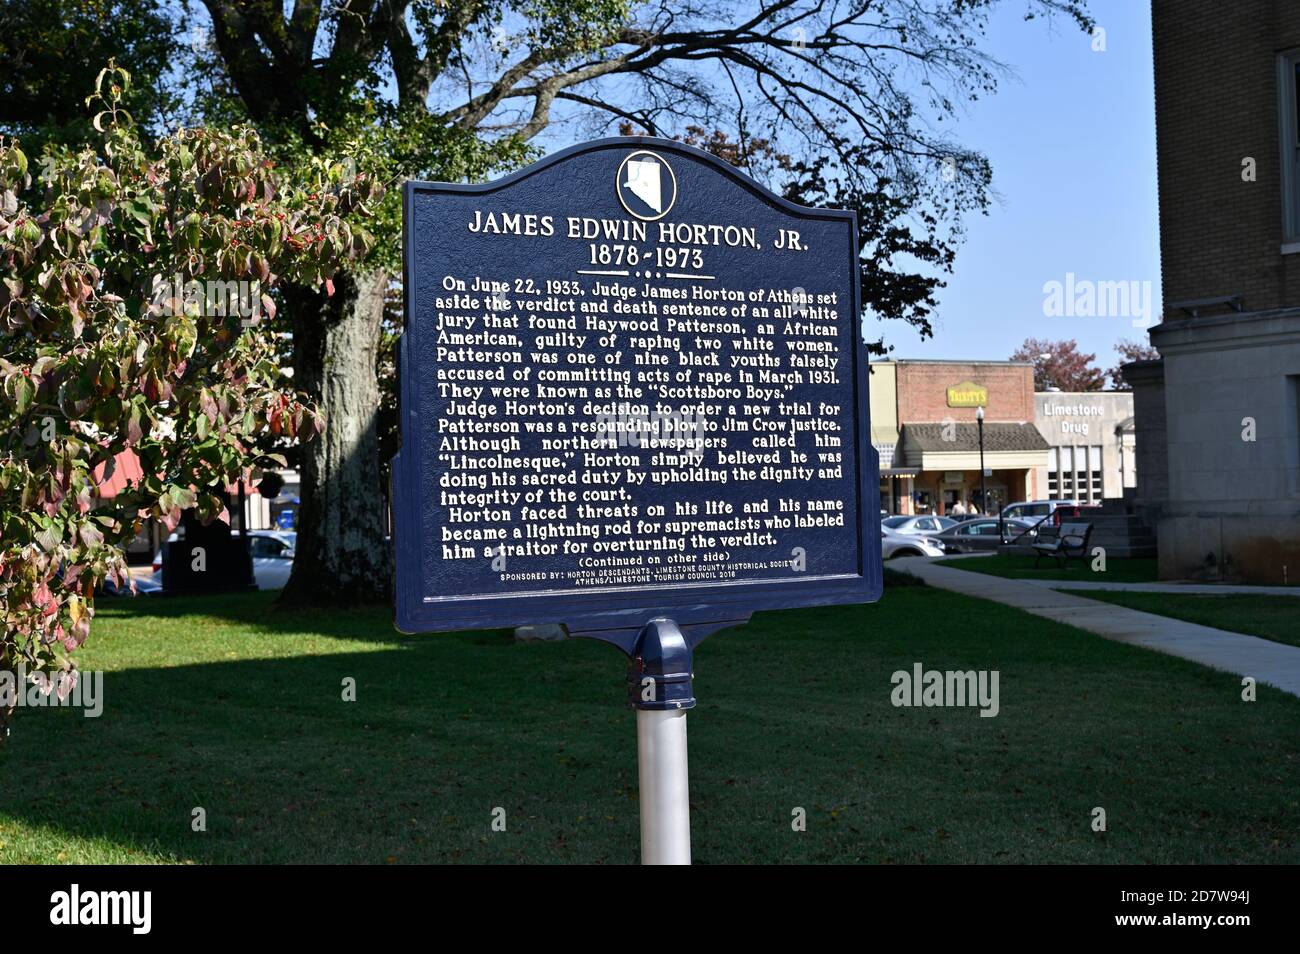 Memorial to Judge James Horton Jr, a small town judge central to civil rights and anti-Jim Crow laws made famous in Athens Alabama, USA. Stock Photo